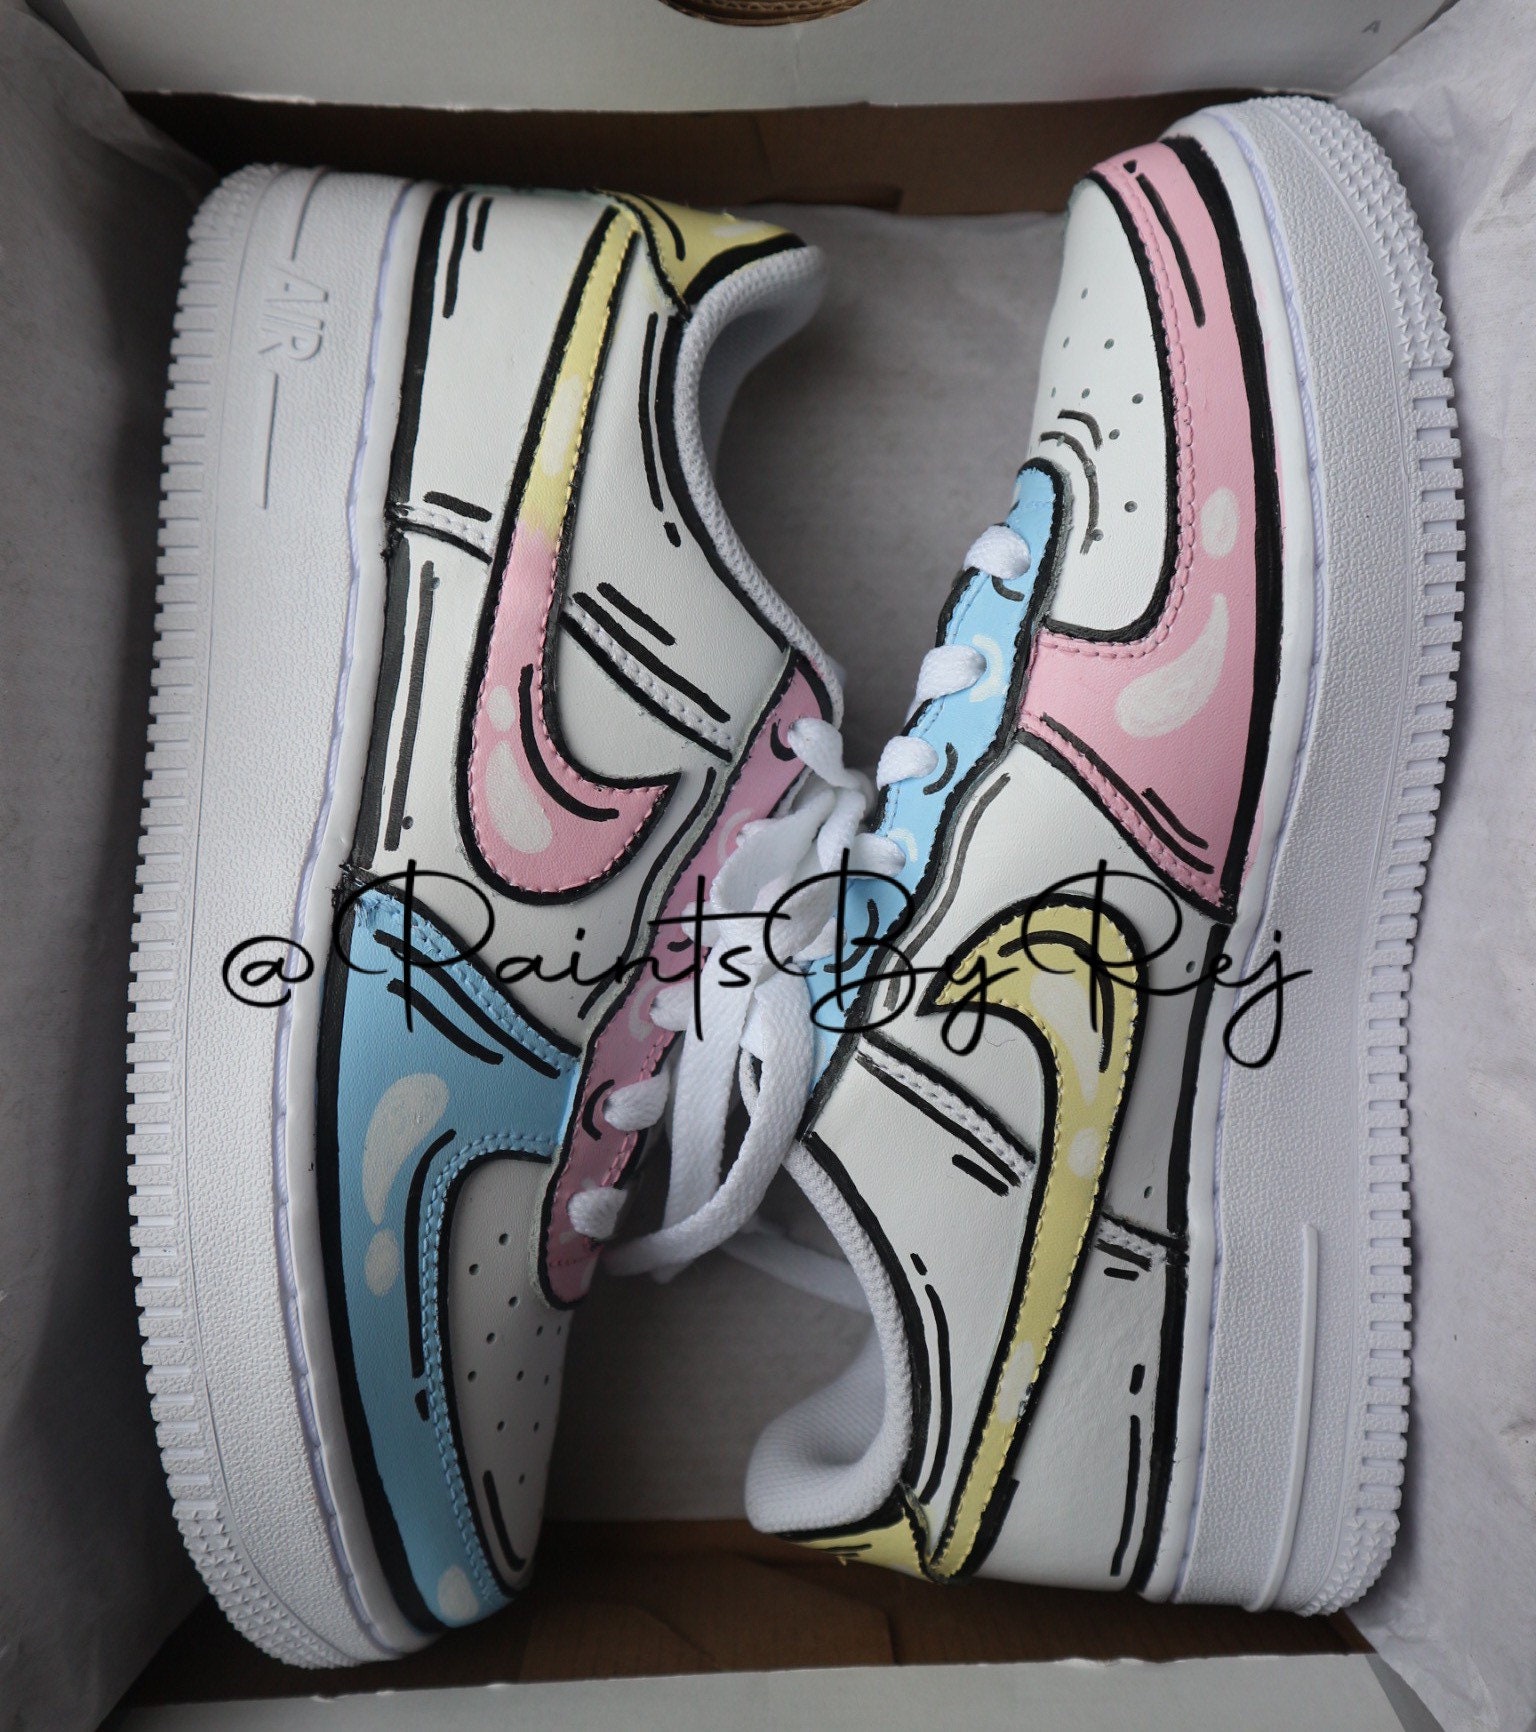 PASTEL HEARTS NIKE AIR FORCE 1'S (more colours) – SNZ FASHION